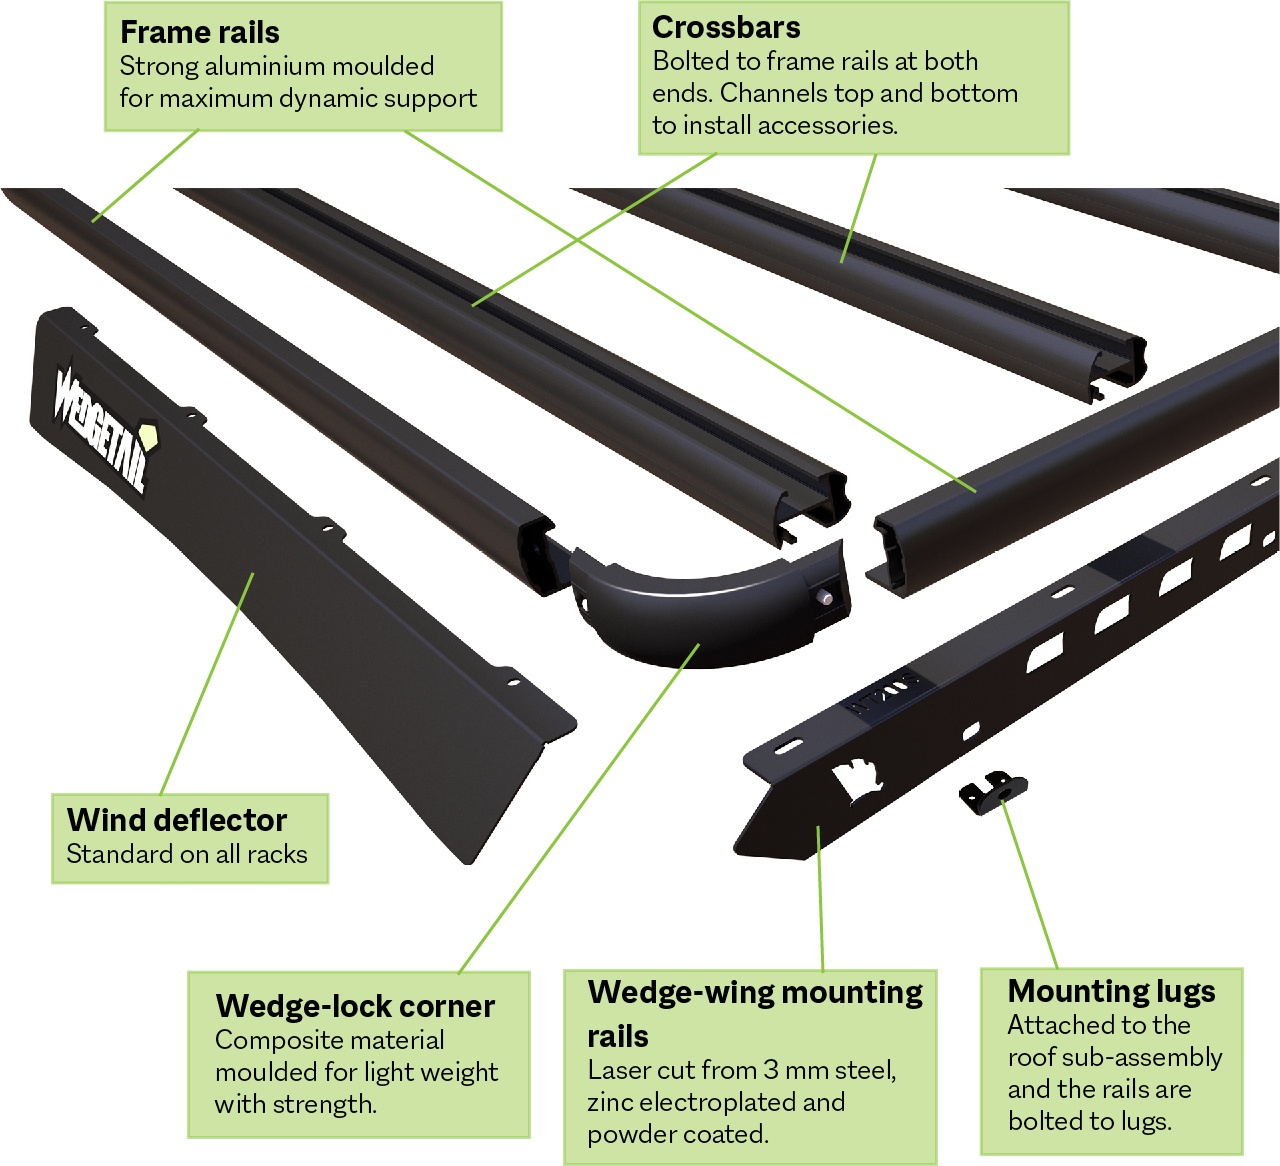 Exploded view of the front corner of a Wedgetail rack showing the components that make up the rack with names and descriptions placed on each component.